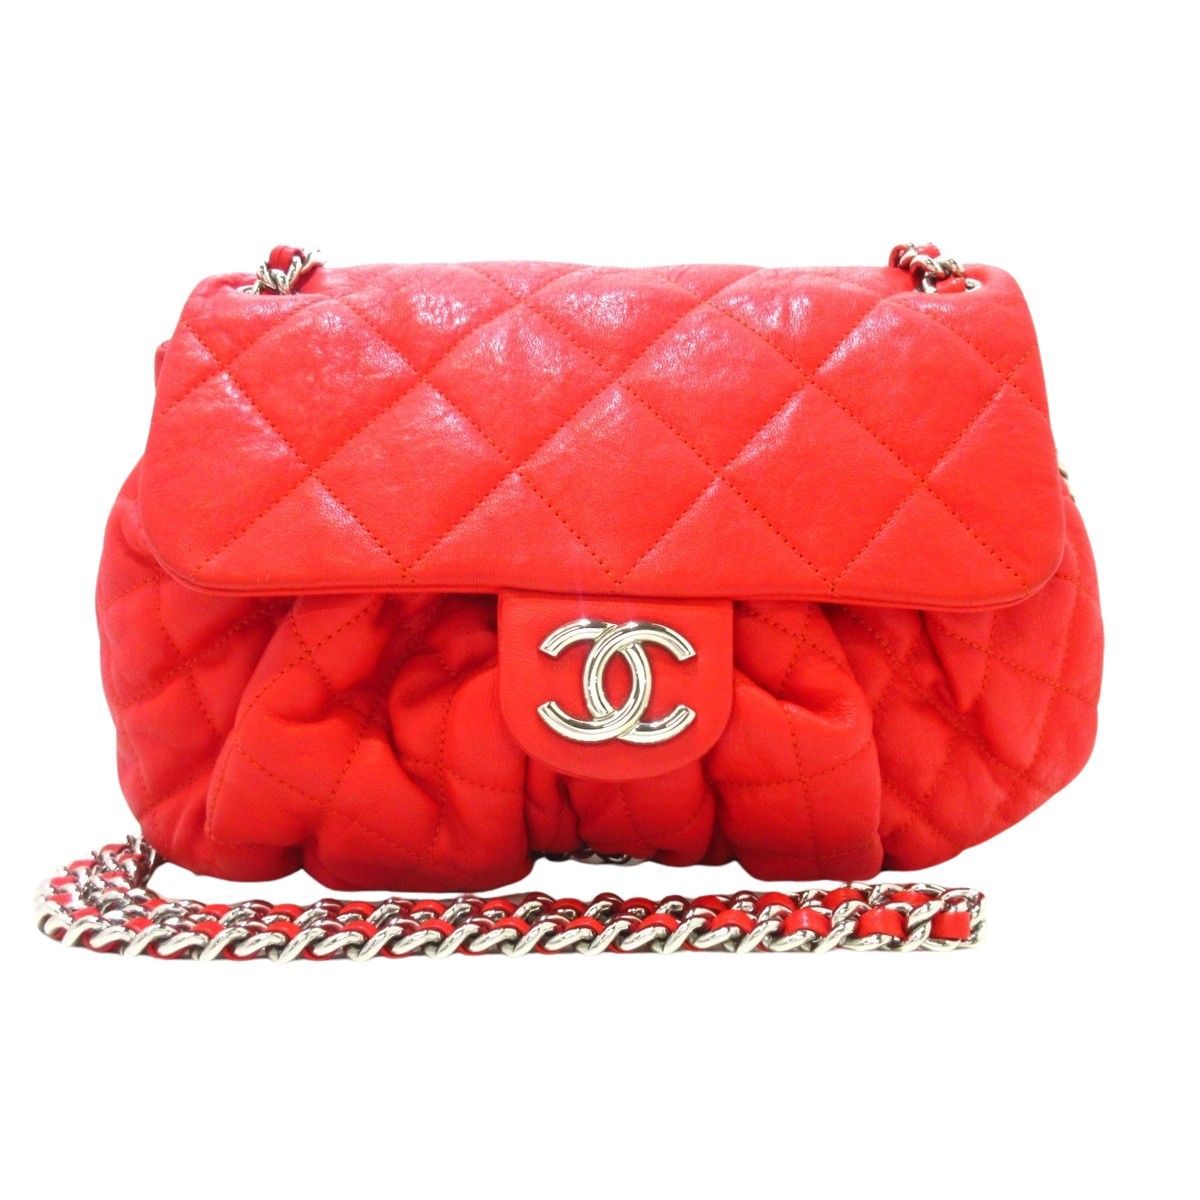 chanel quilted bag silver chain